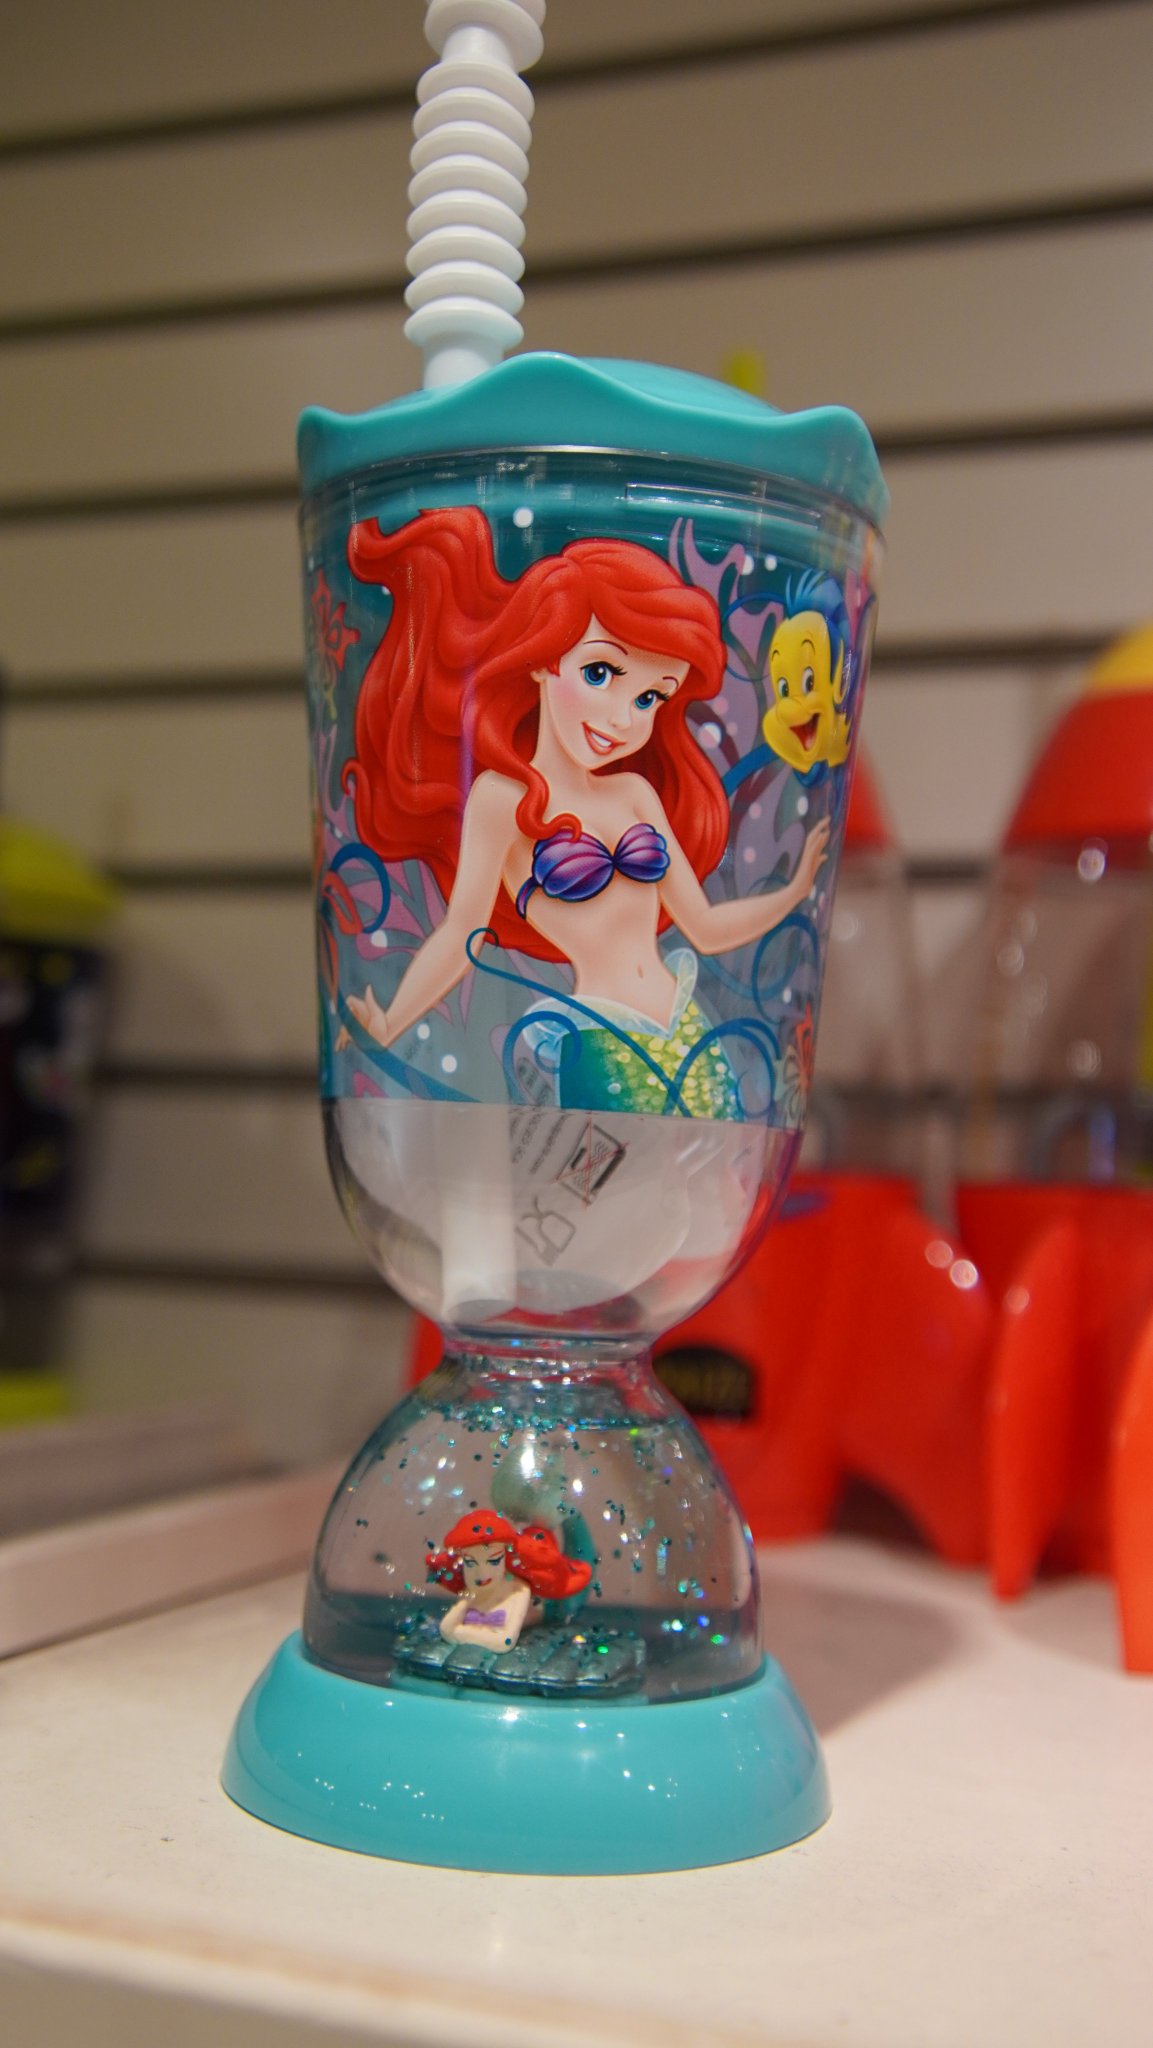 bioreconstruct on Twitter "Tall photo, Little Mermaid cup, with snow